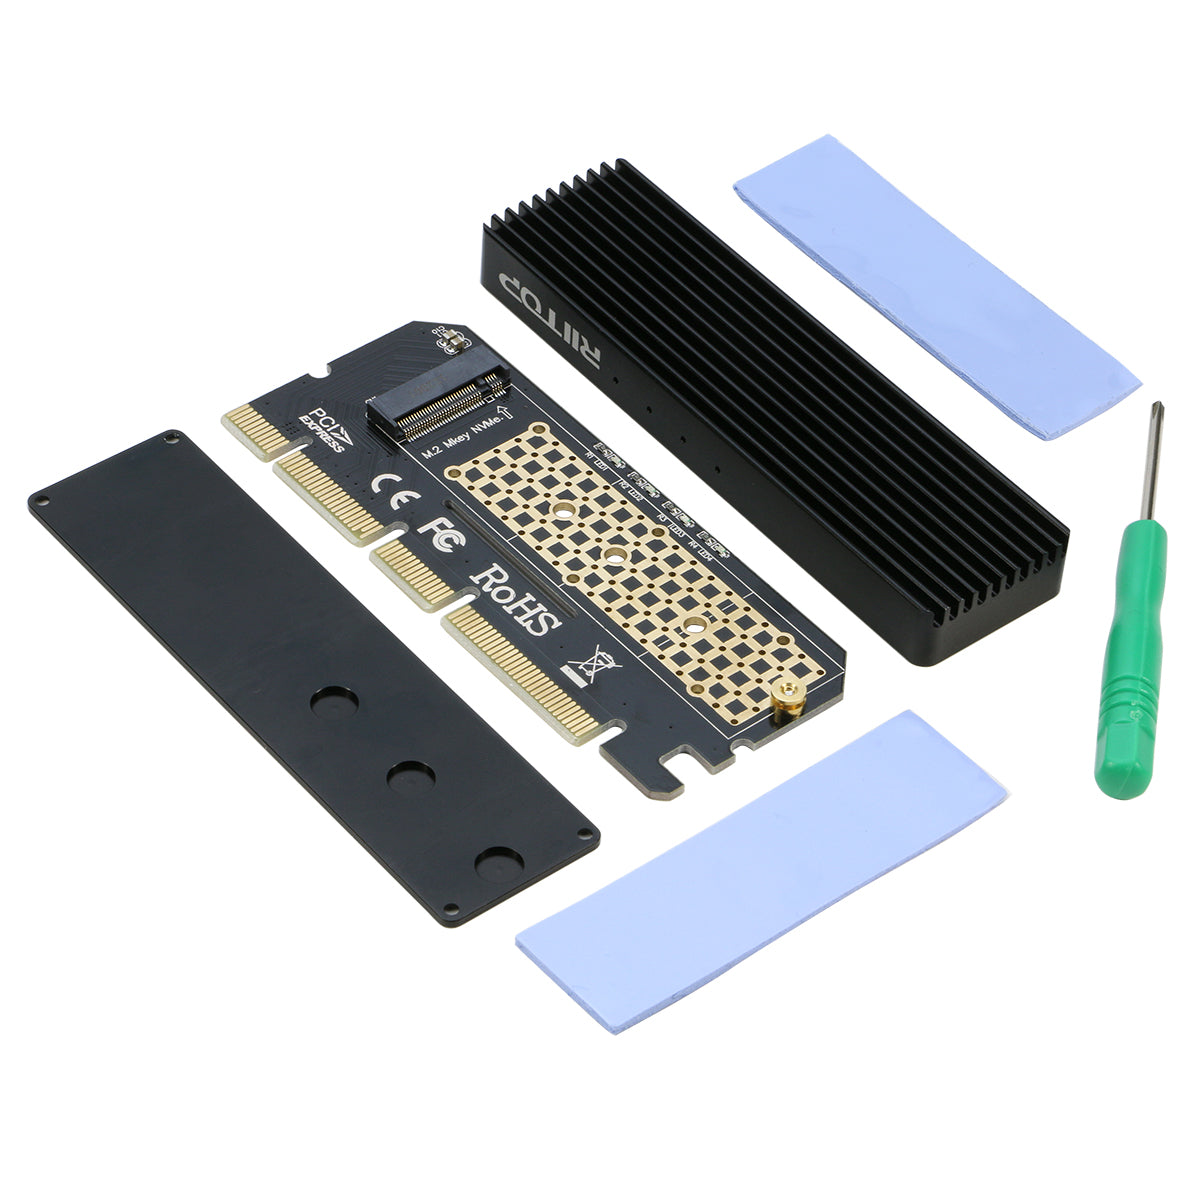 NVMe to PCIe Adapter, RIITOP M Key M.2 PCIe SSD to PCI-e x4/x8/x16 Con